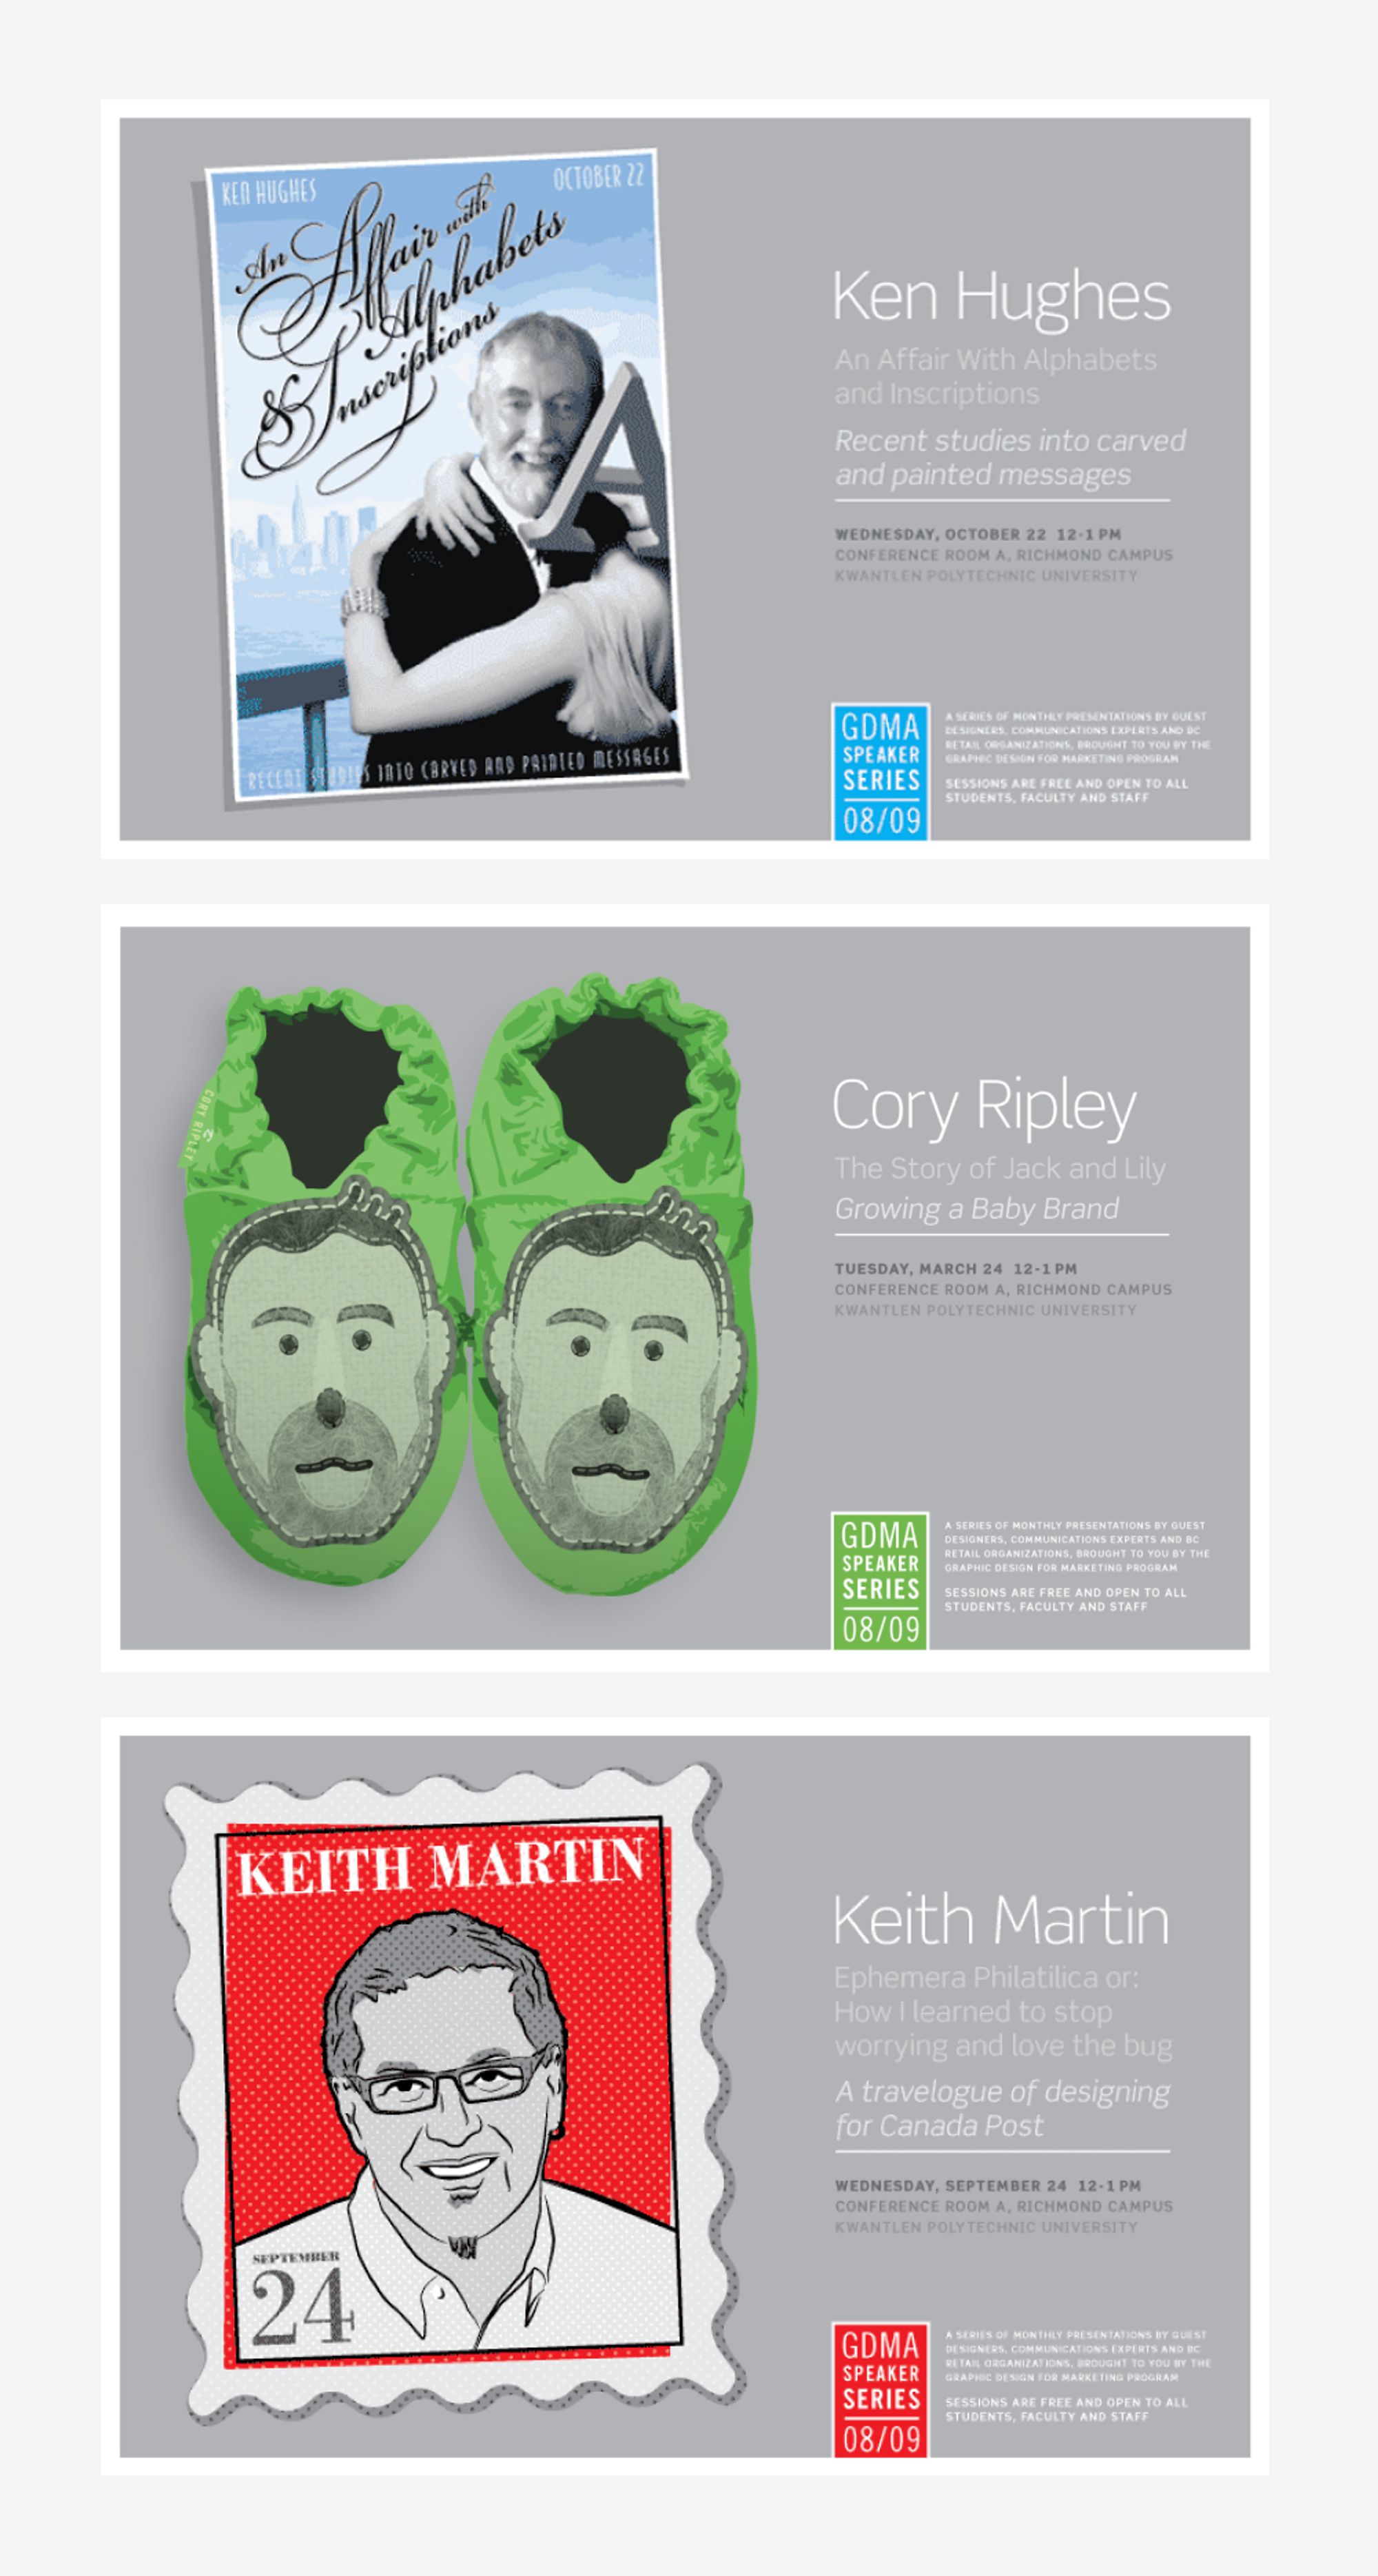 Selection of my poster designs for the GDMA guest speaker series